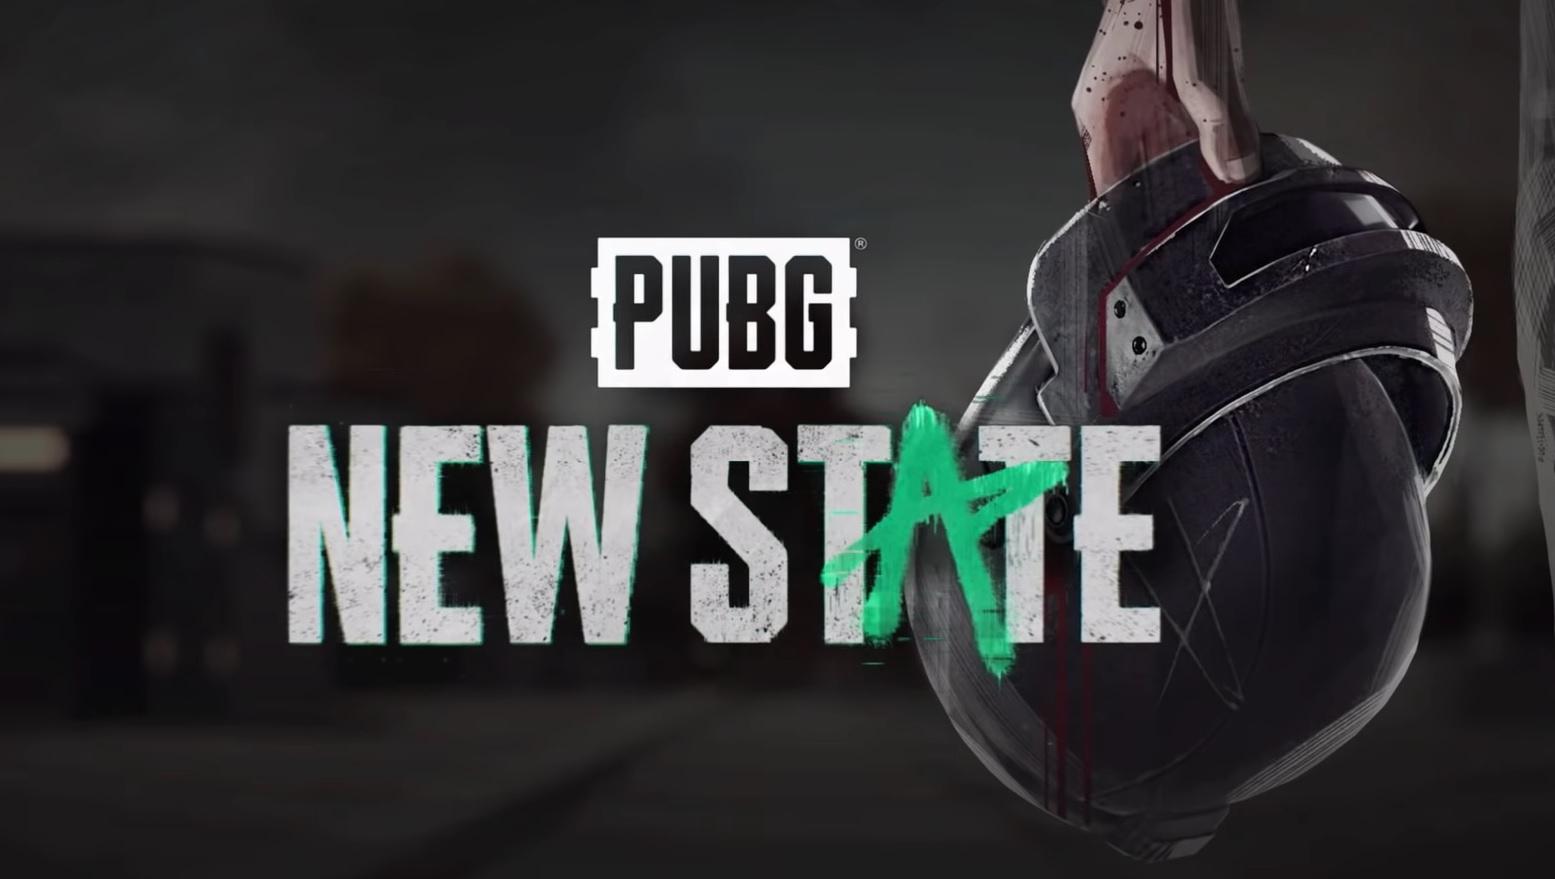 APEX LEGENDS MOBILE vs PUBG NEW STATE COMPARISON - WHO IS THE BEST? 